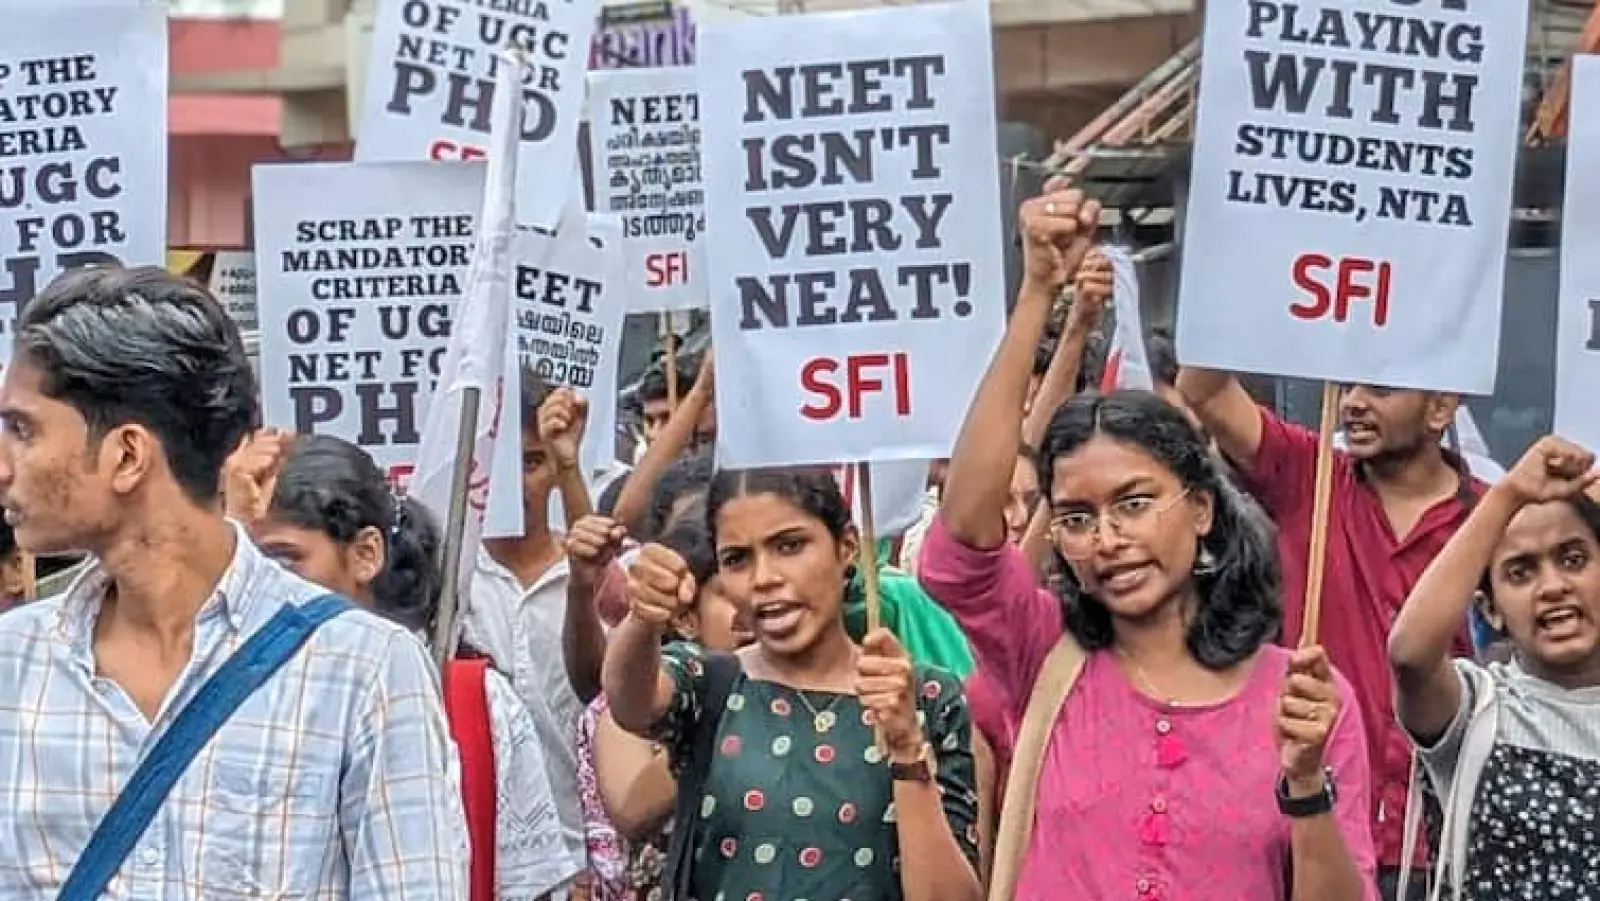 NEET-UG leaked for 32 lakh in Patna, accused arrested and confessed